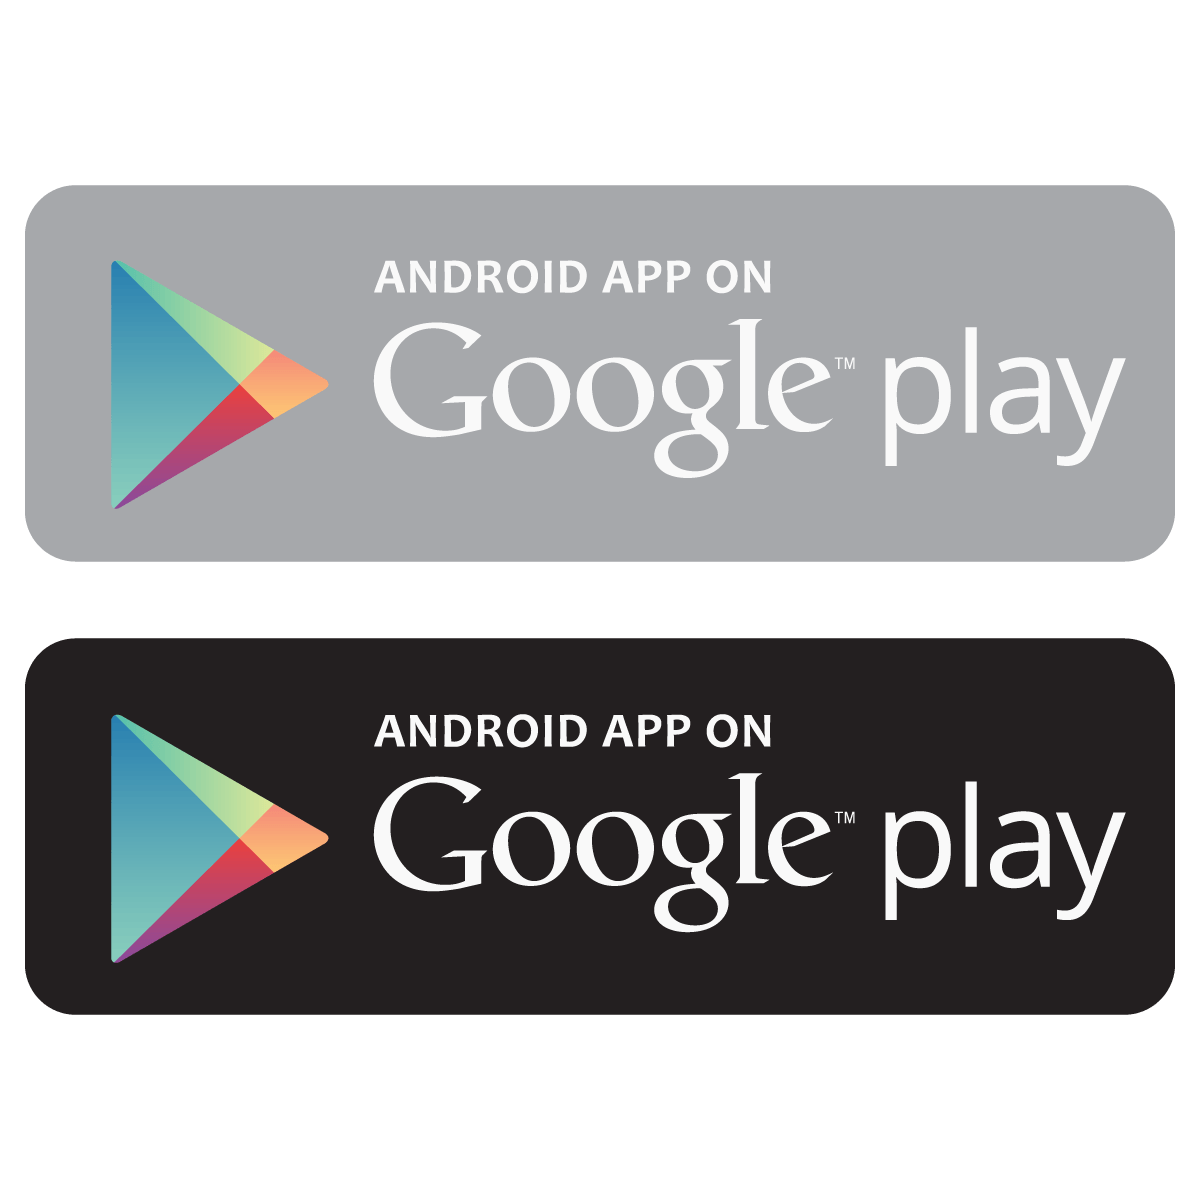 Andriod App On Google Play Logo - Android App On Google Play Logo Vector. Free Vector Silhouette